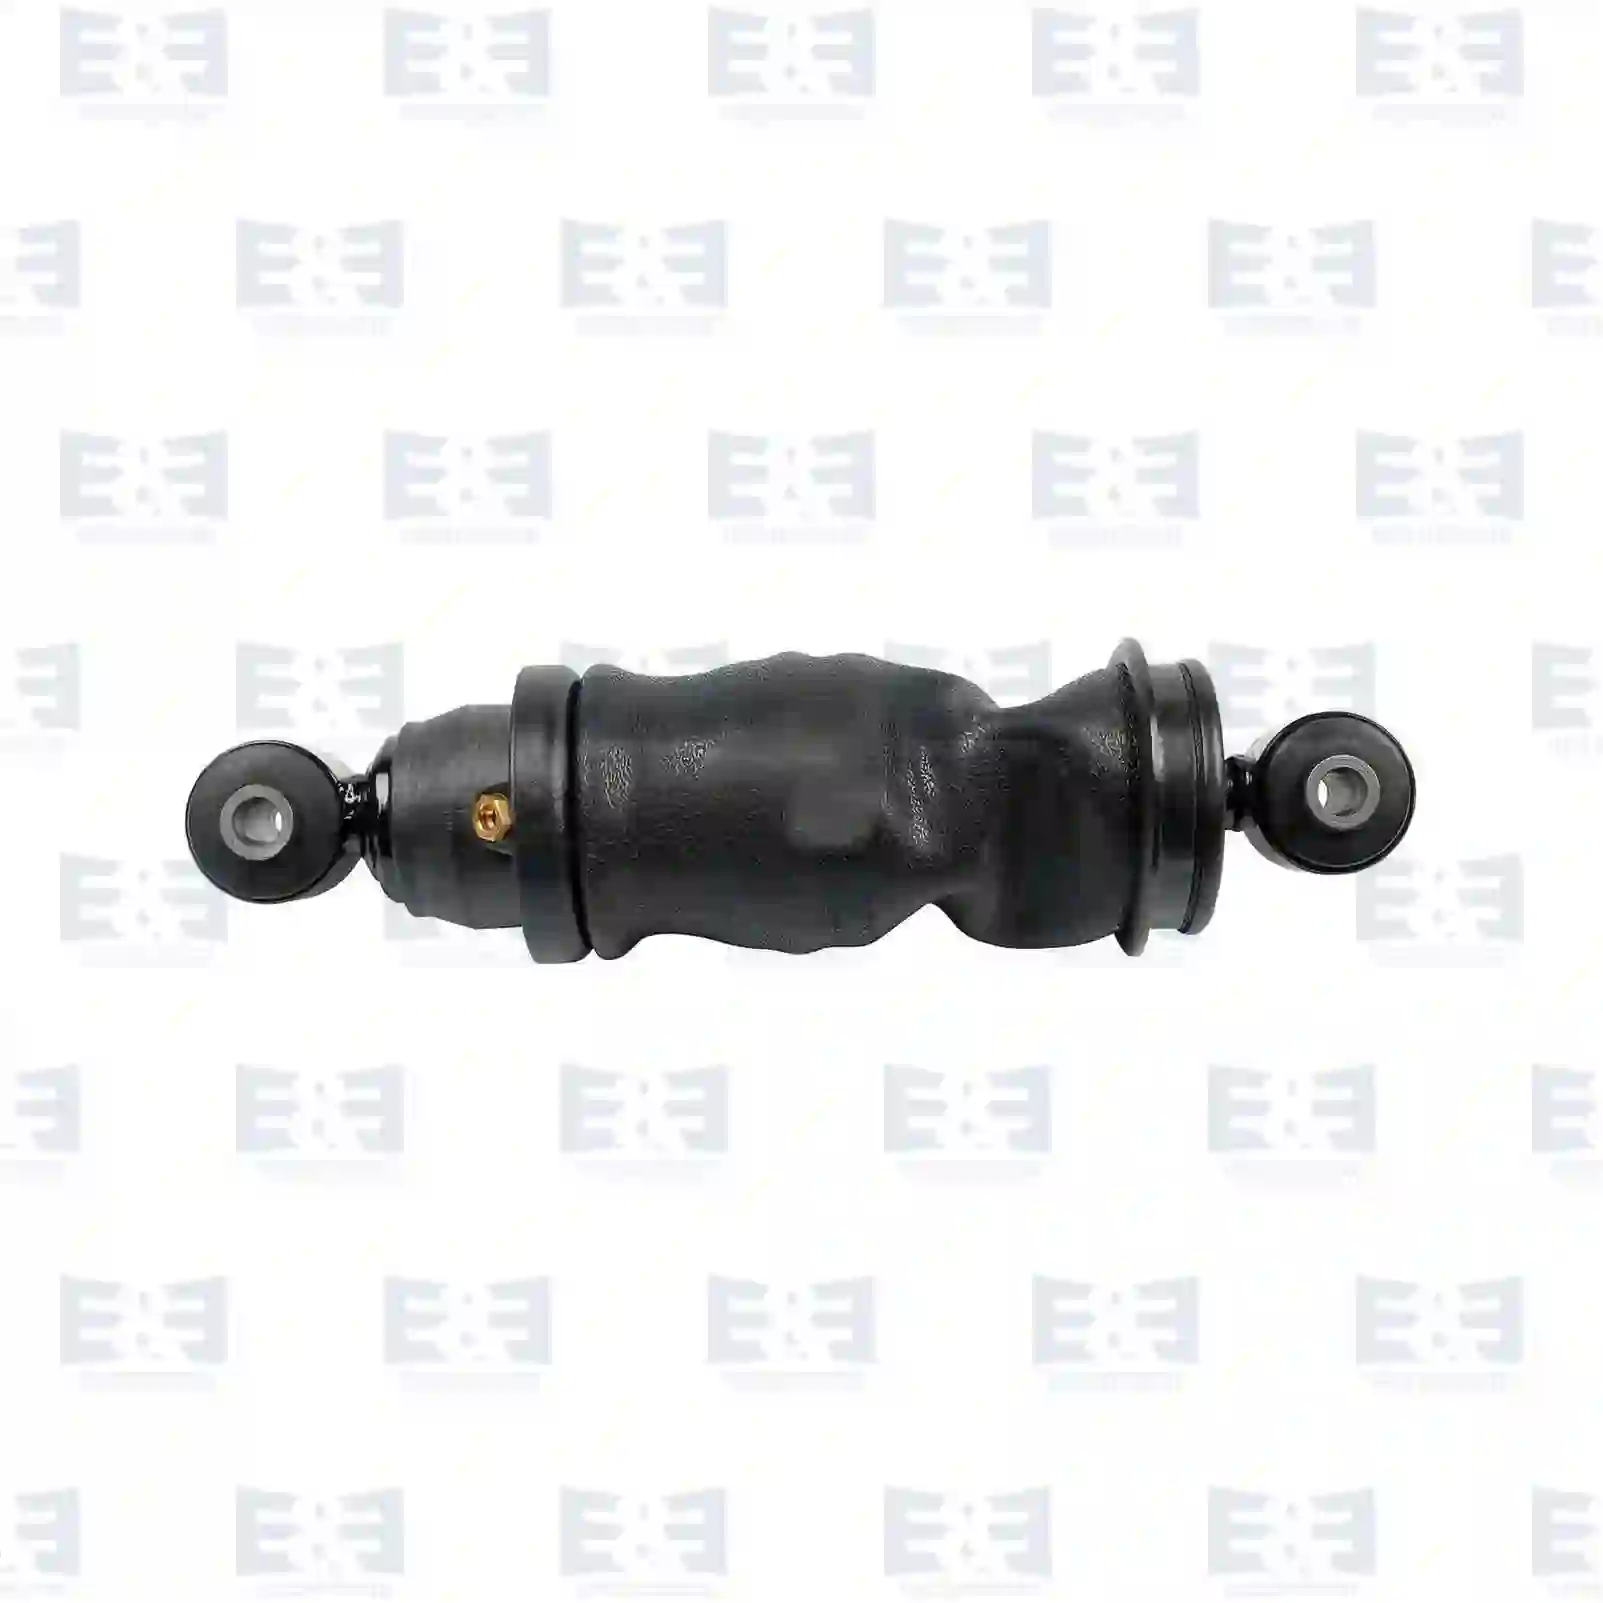 Cabin shock absorber, with air bellow, 2E2276108, 9428906119, , , ||  2E2276108 E&E Truck Spare Parts | Truck Spare Parts, Auotomotive Spare Parts Cabin shock absorber, with air bellow, 2E2276108, 9428906119, , , ||  2E2276108 E&E Truck Spare Parts | Truck Spare Parts, Auotomotive Spare Parts